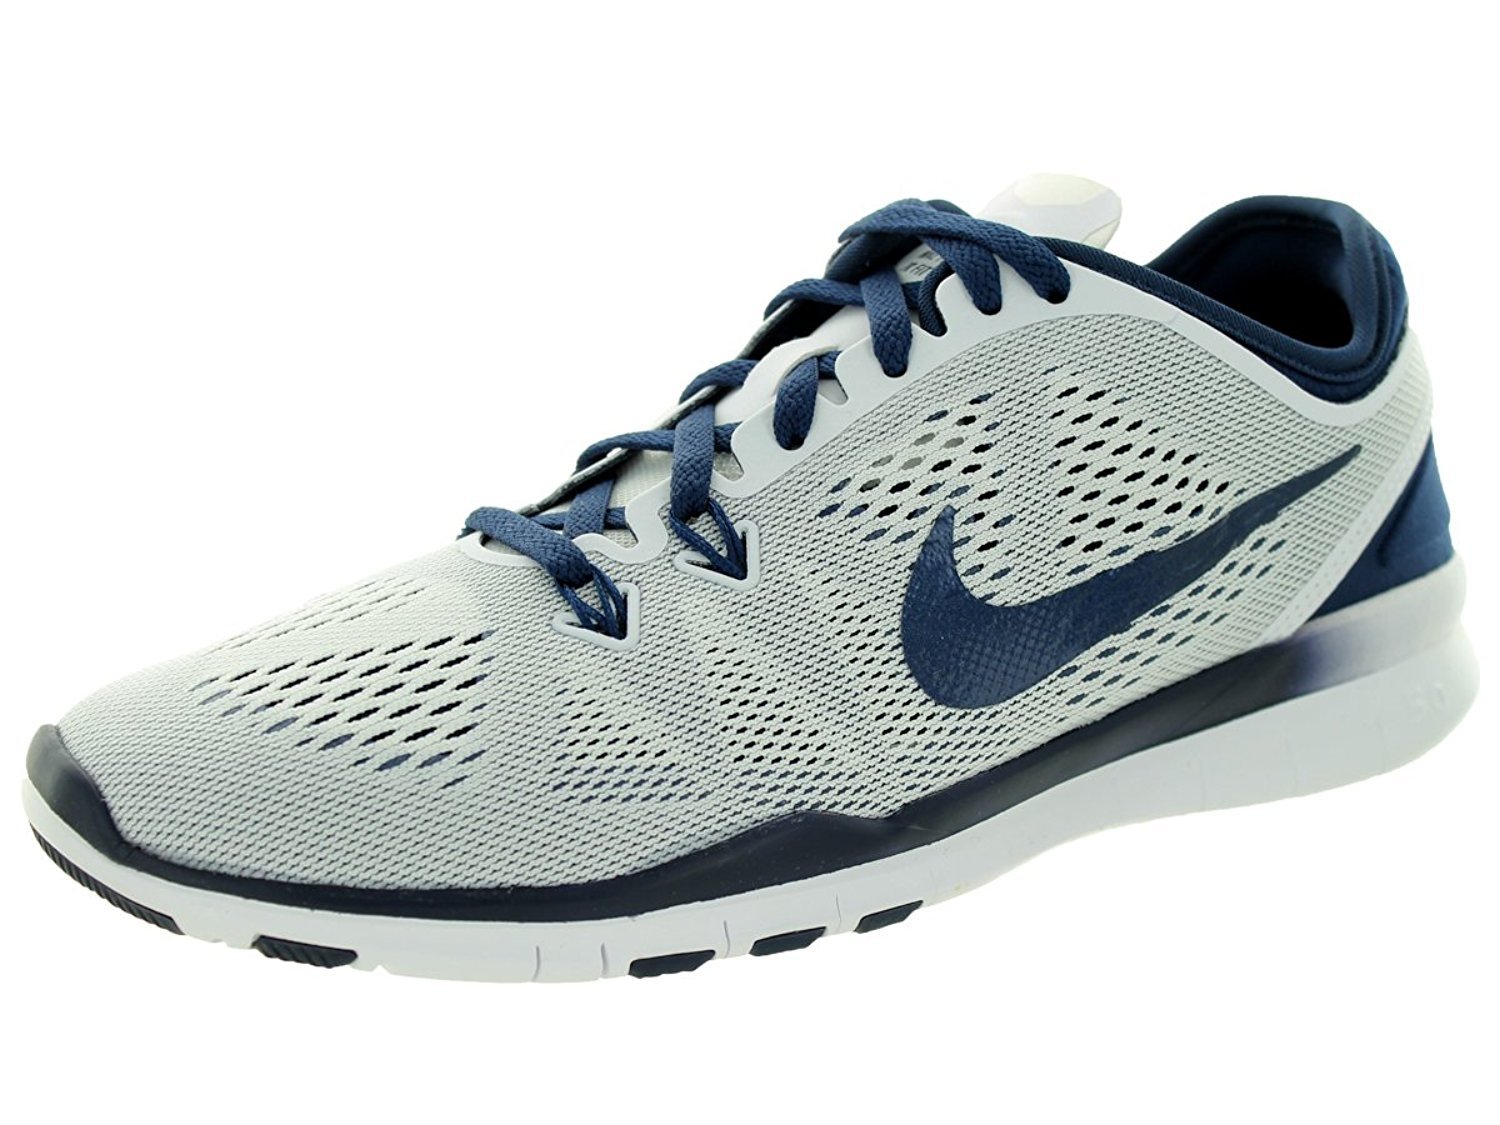 Nike Free 5.0 TR Fit 5 Women's Cross Training Shoes (5.5, WHITE/MIDNIGHT NAVY) - image 1 of 5